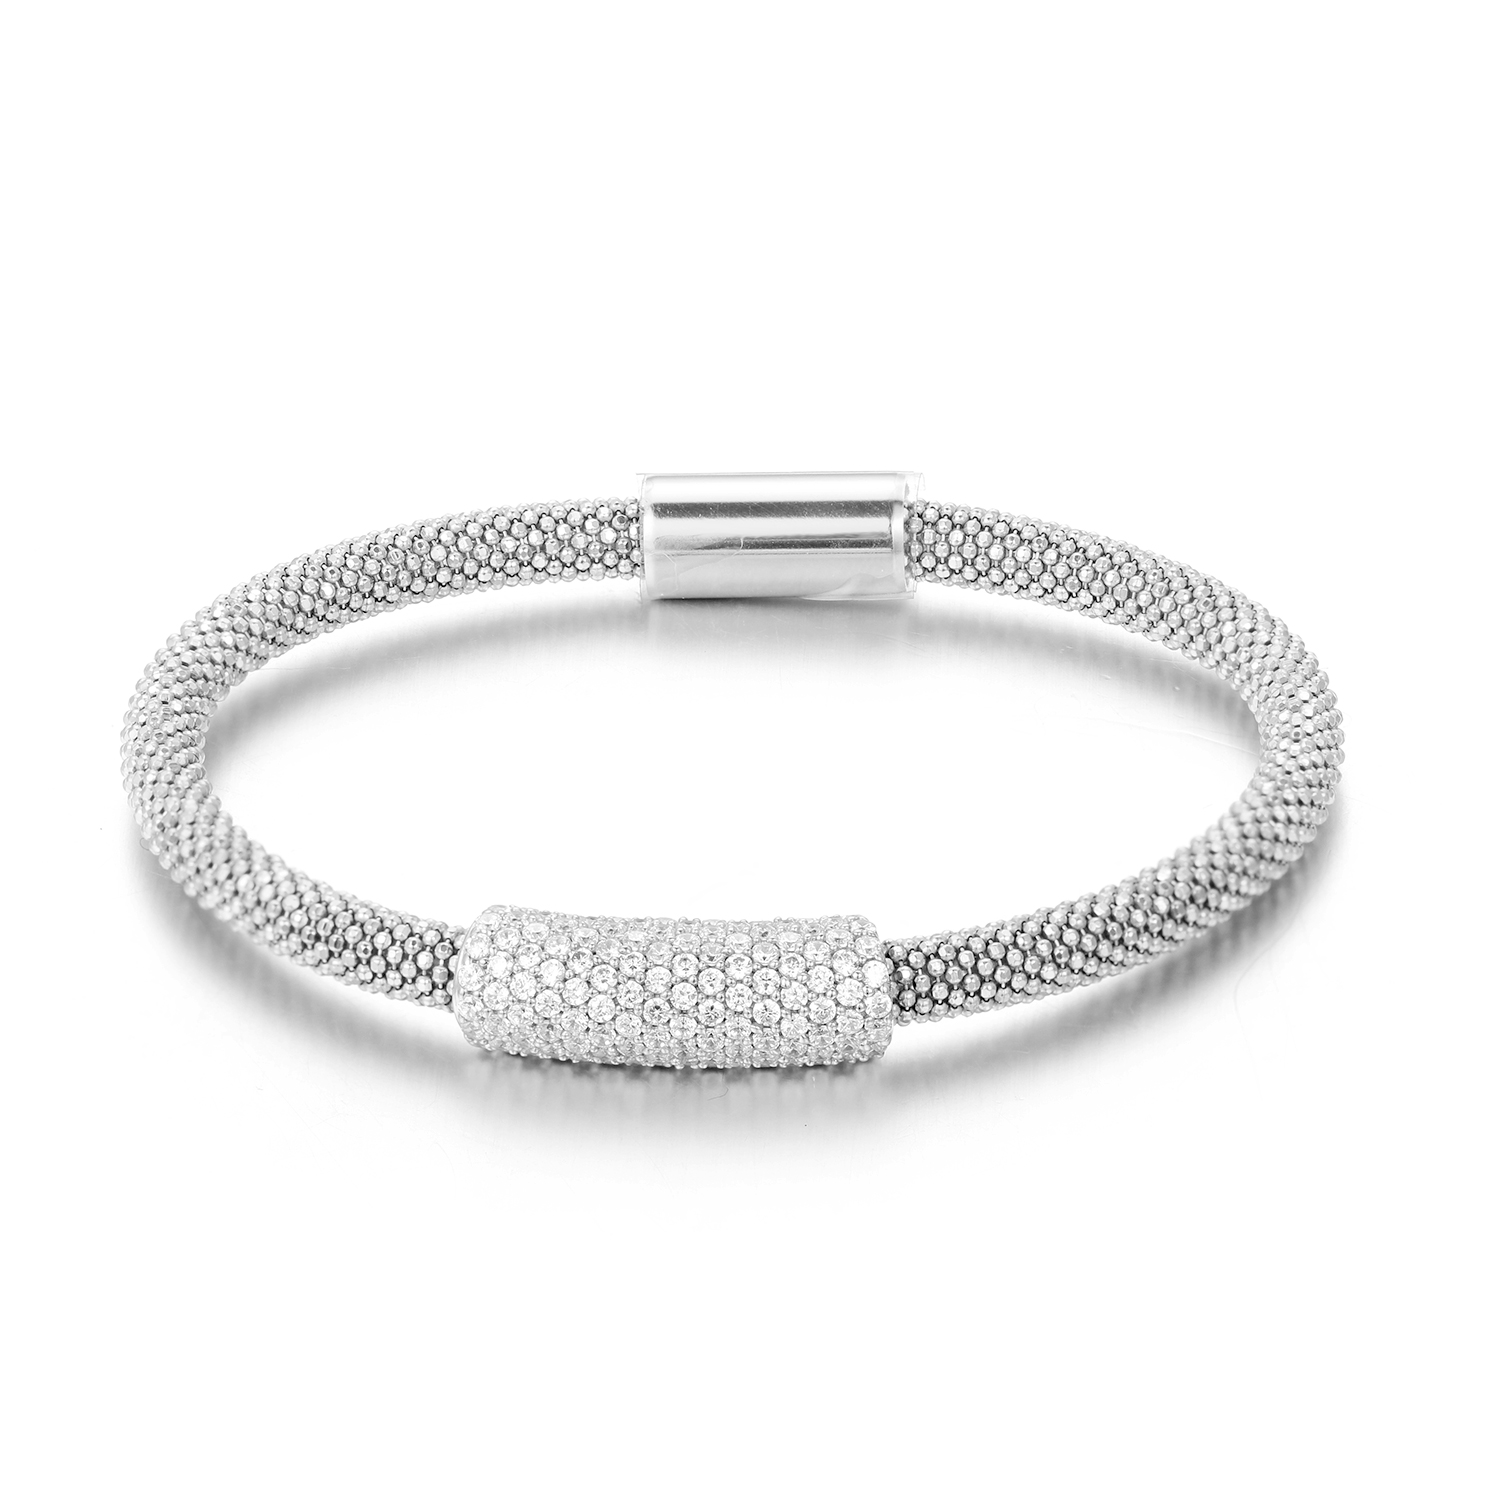 Fine 4.5mm White Rhodium Plated Silver CZ Magnet Bangle Bracelet made in italy